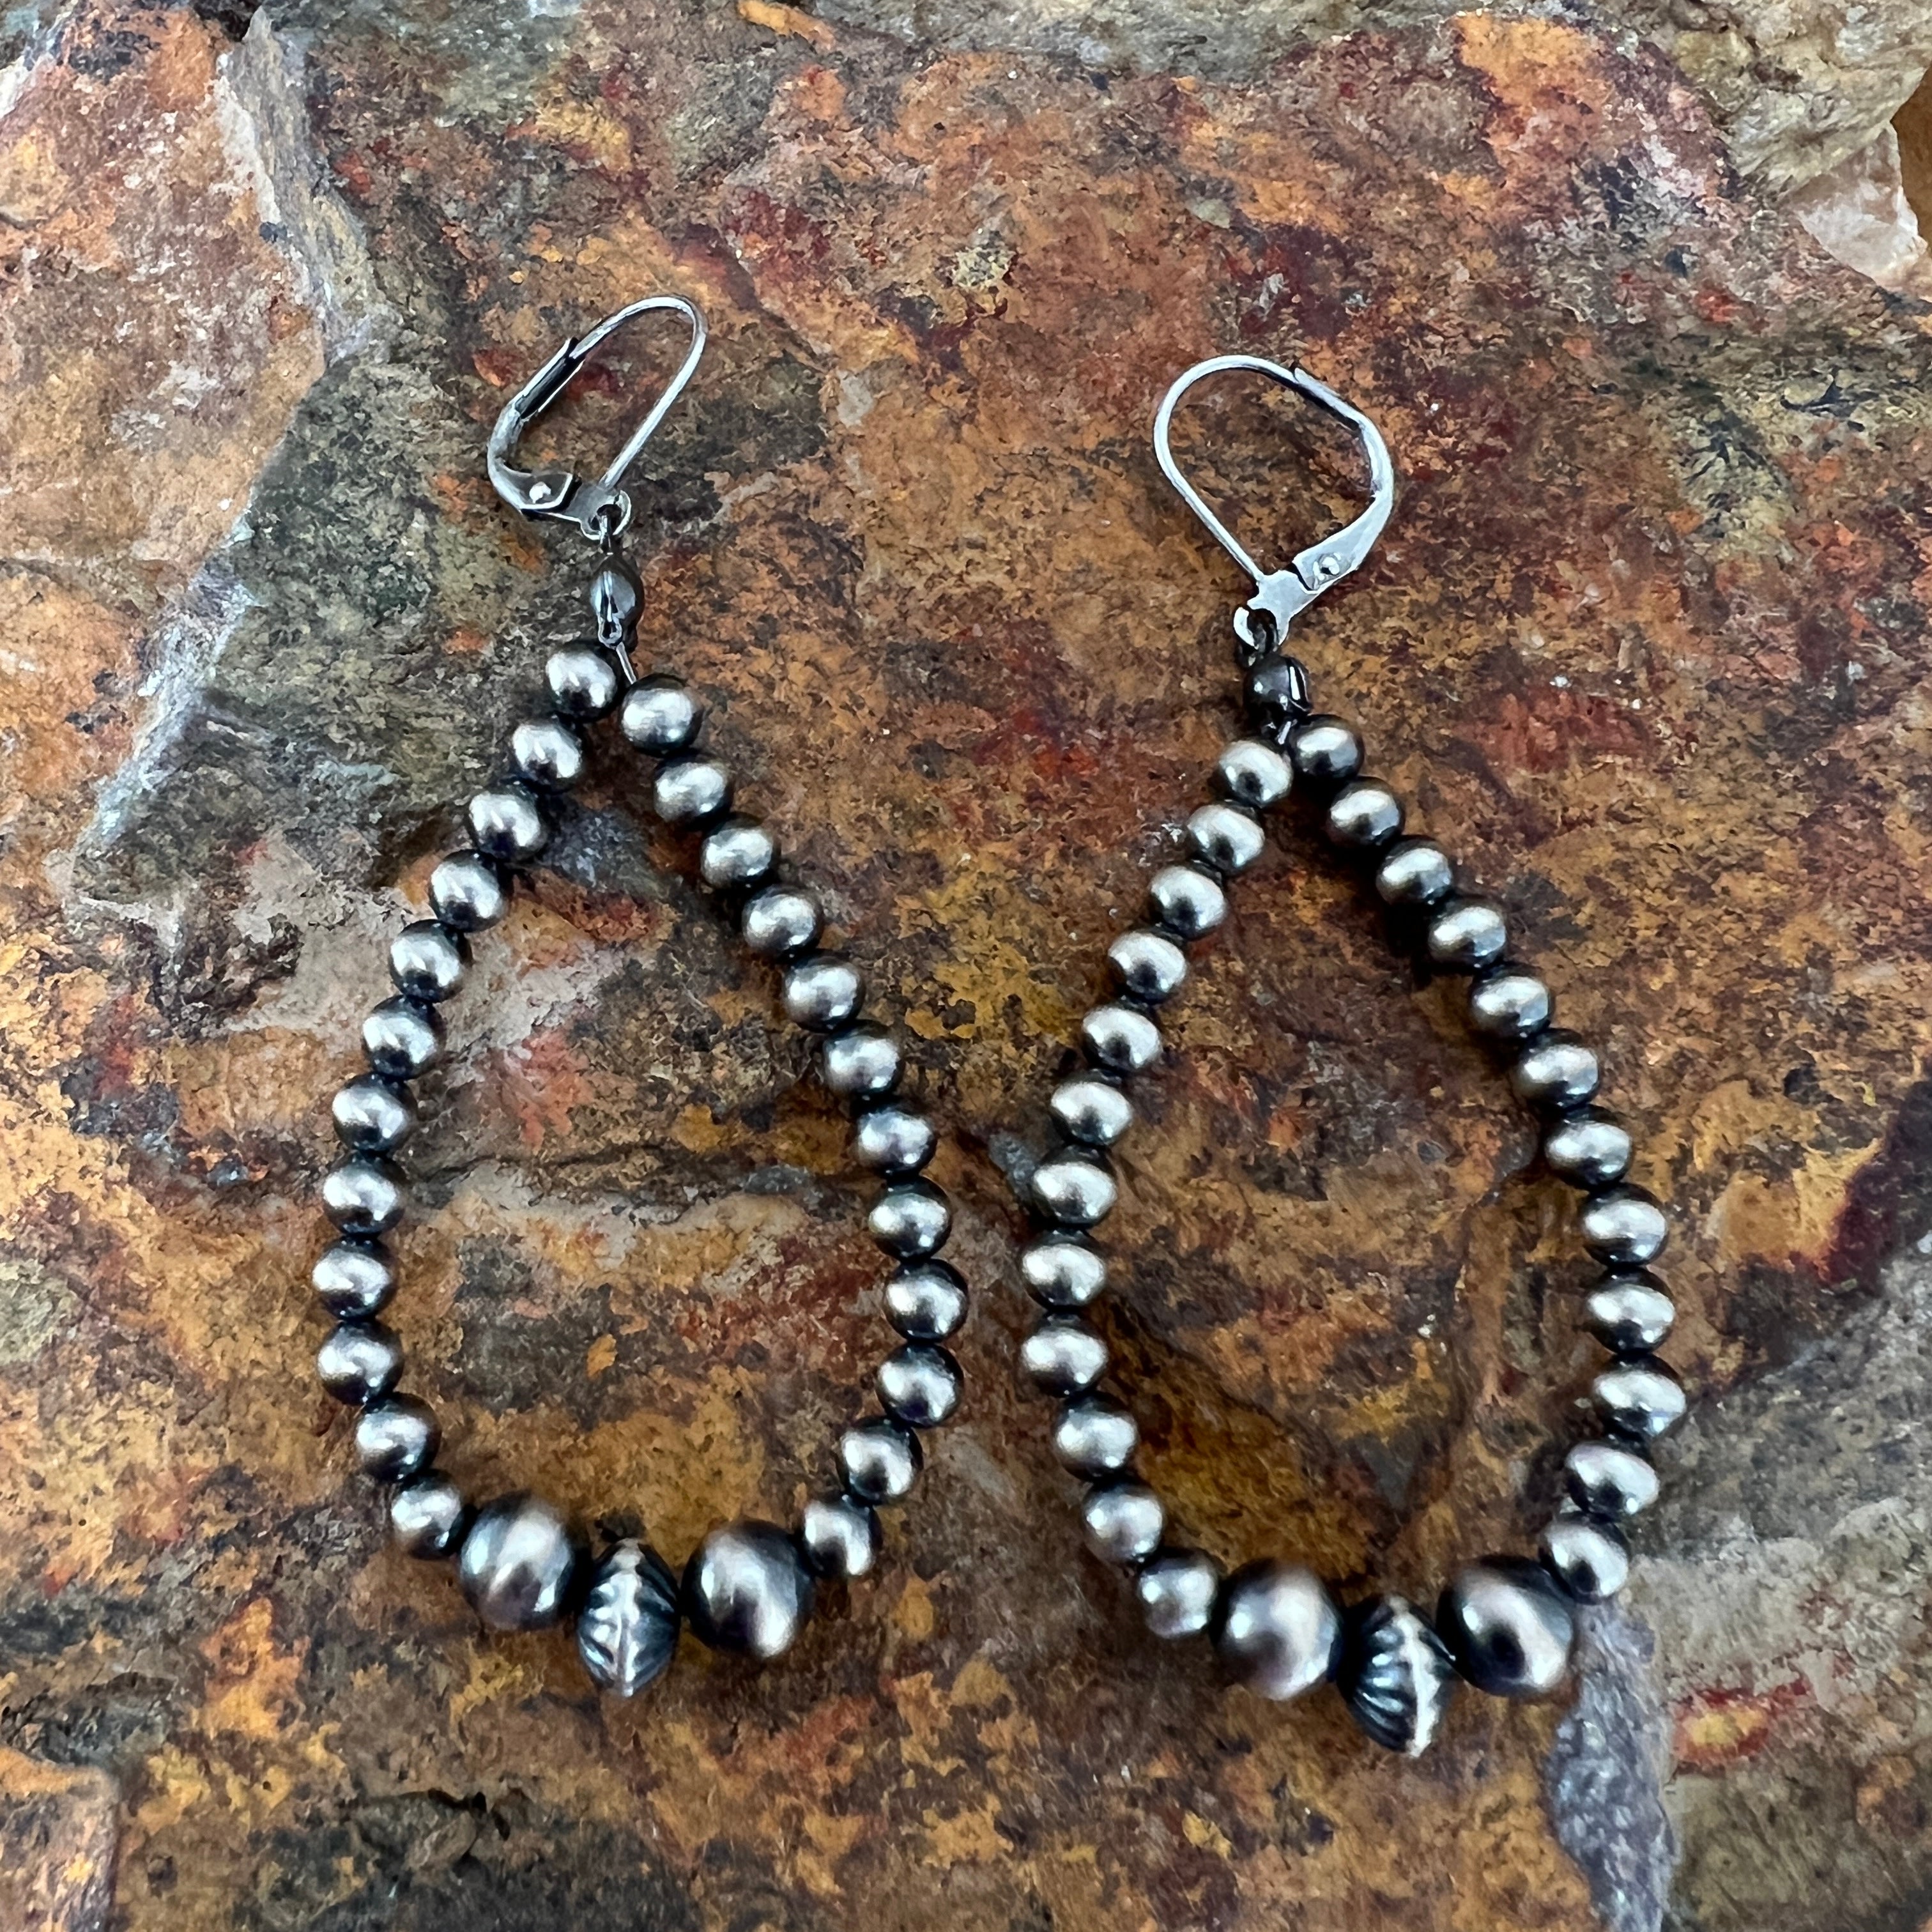 Old Pawn Navajo Mismatched Earrings